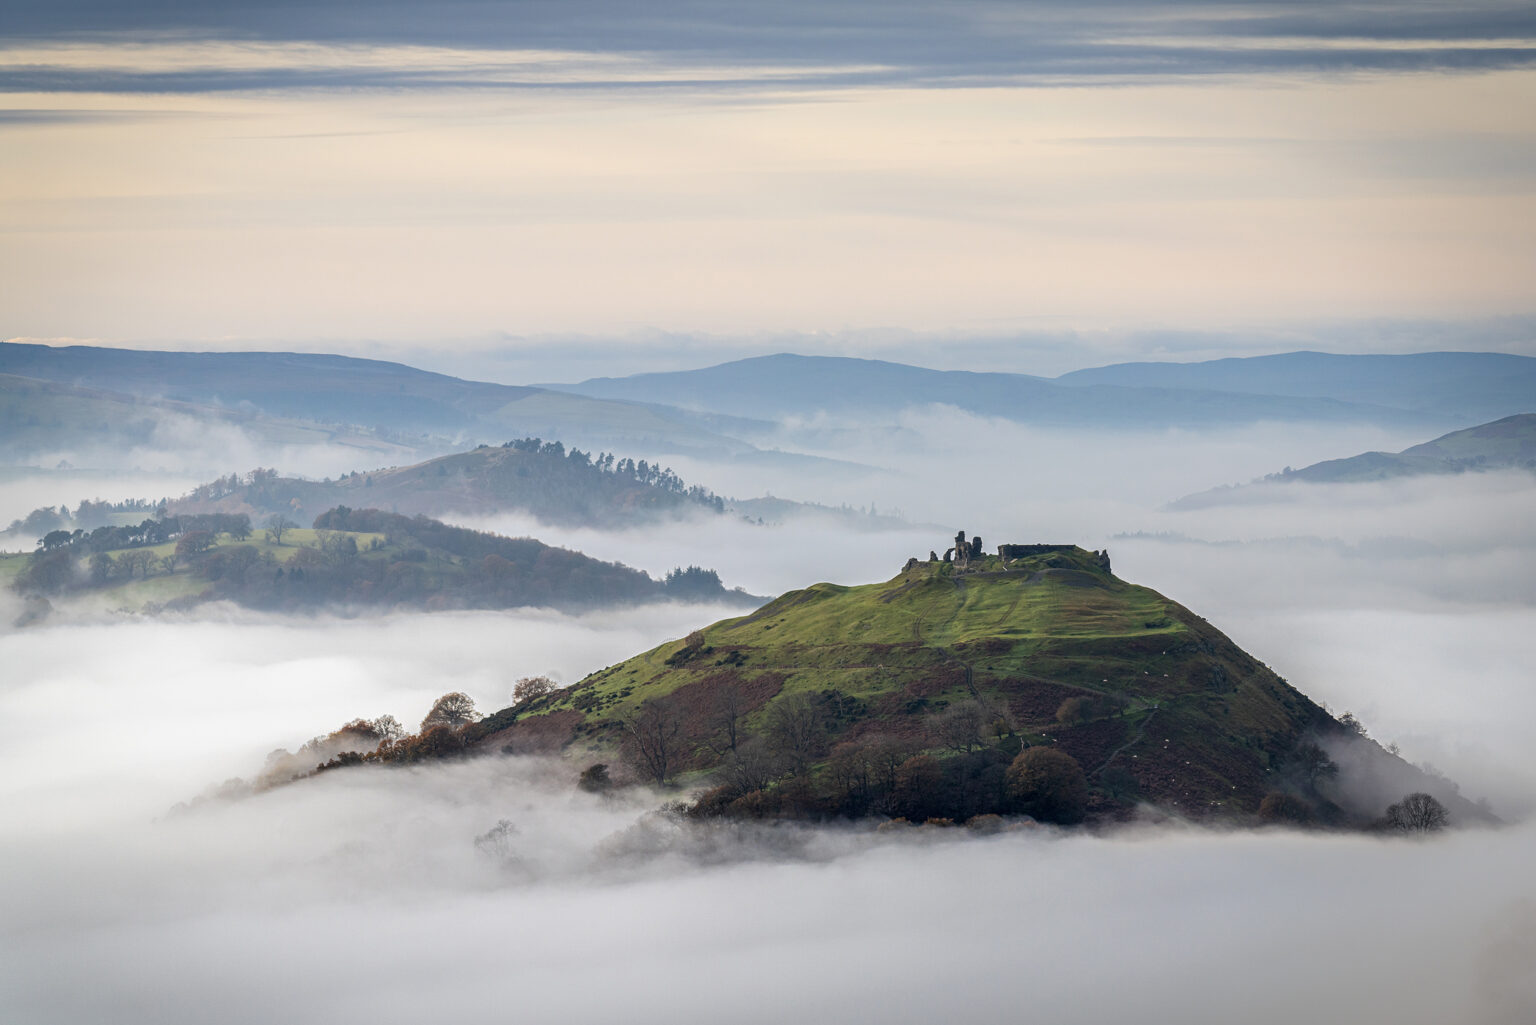 Castell Dinas Bran above the fog - Wales Landscape Photography